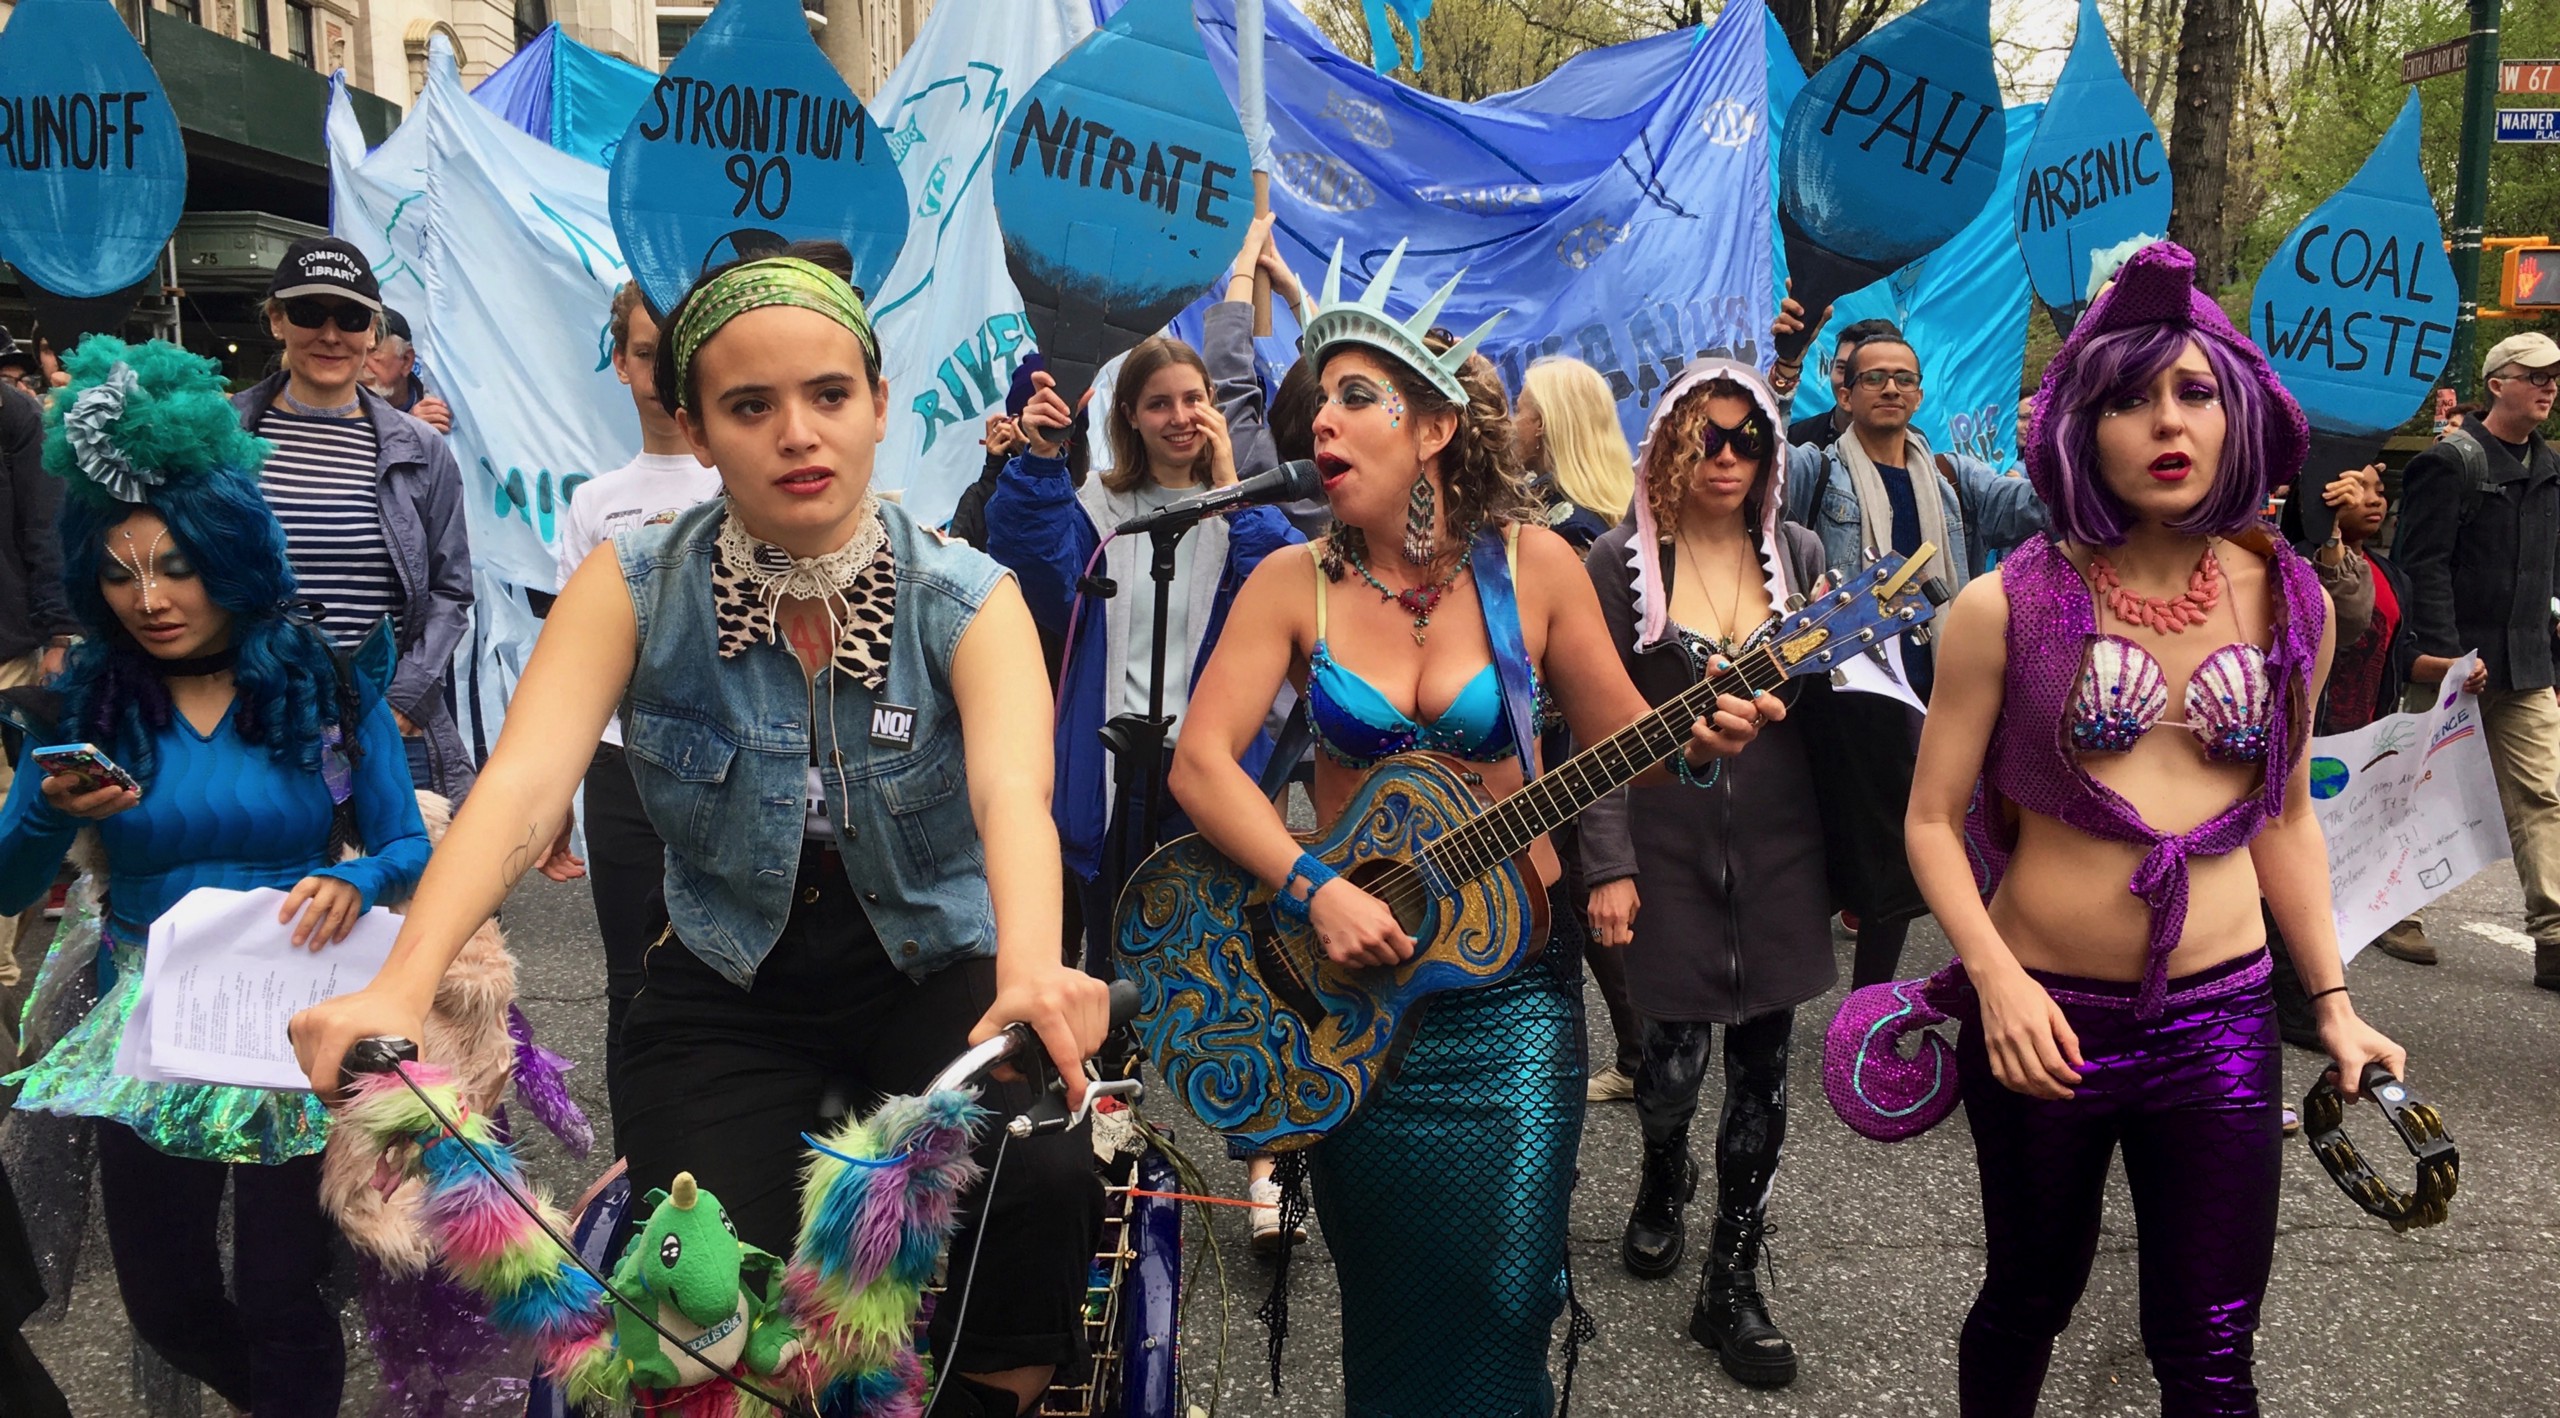 The Liberty Singers join the March for Science protests